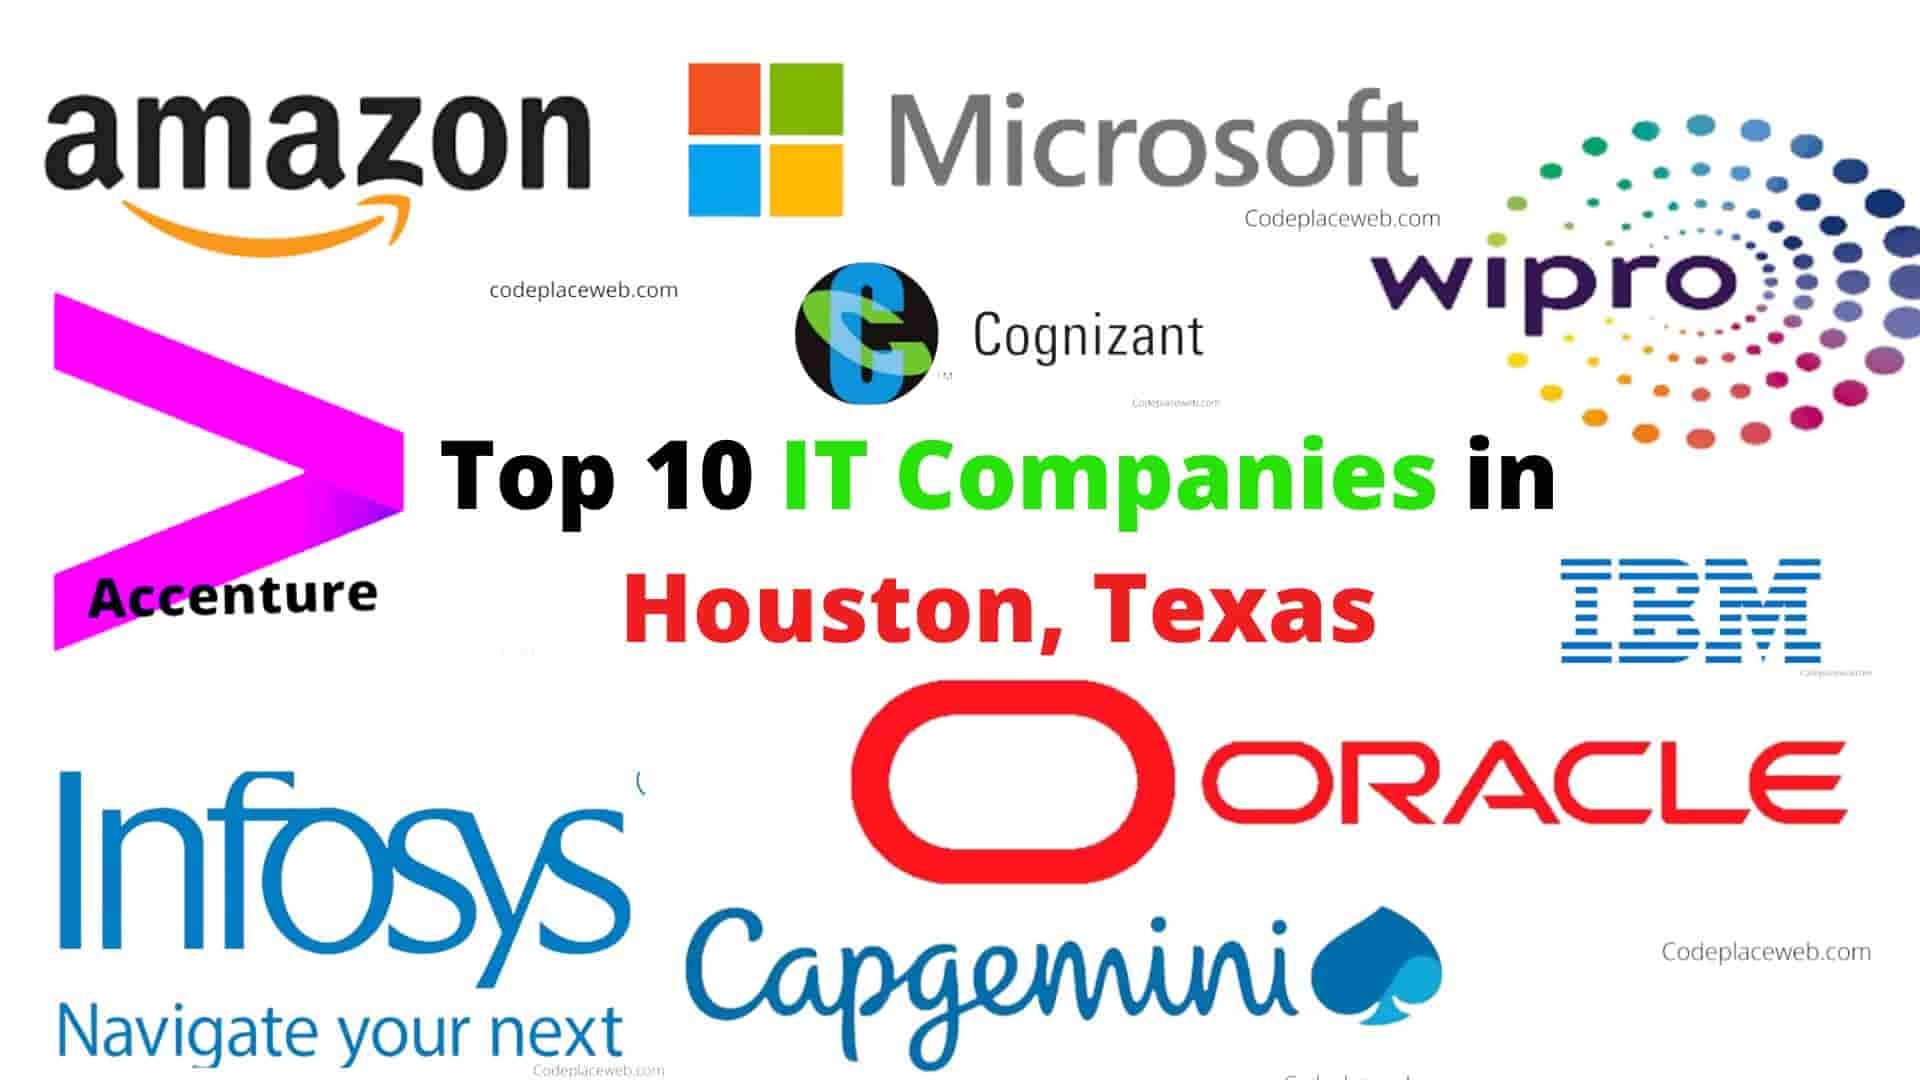 List of Top 10 IT Companies in Houston, Texas by Revenue and Market Capitalization.